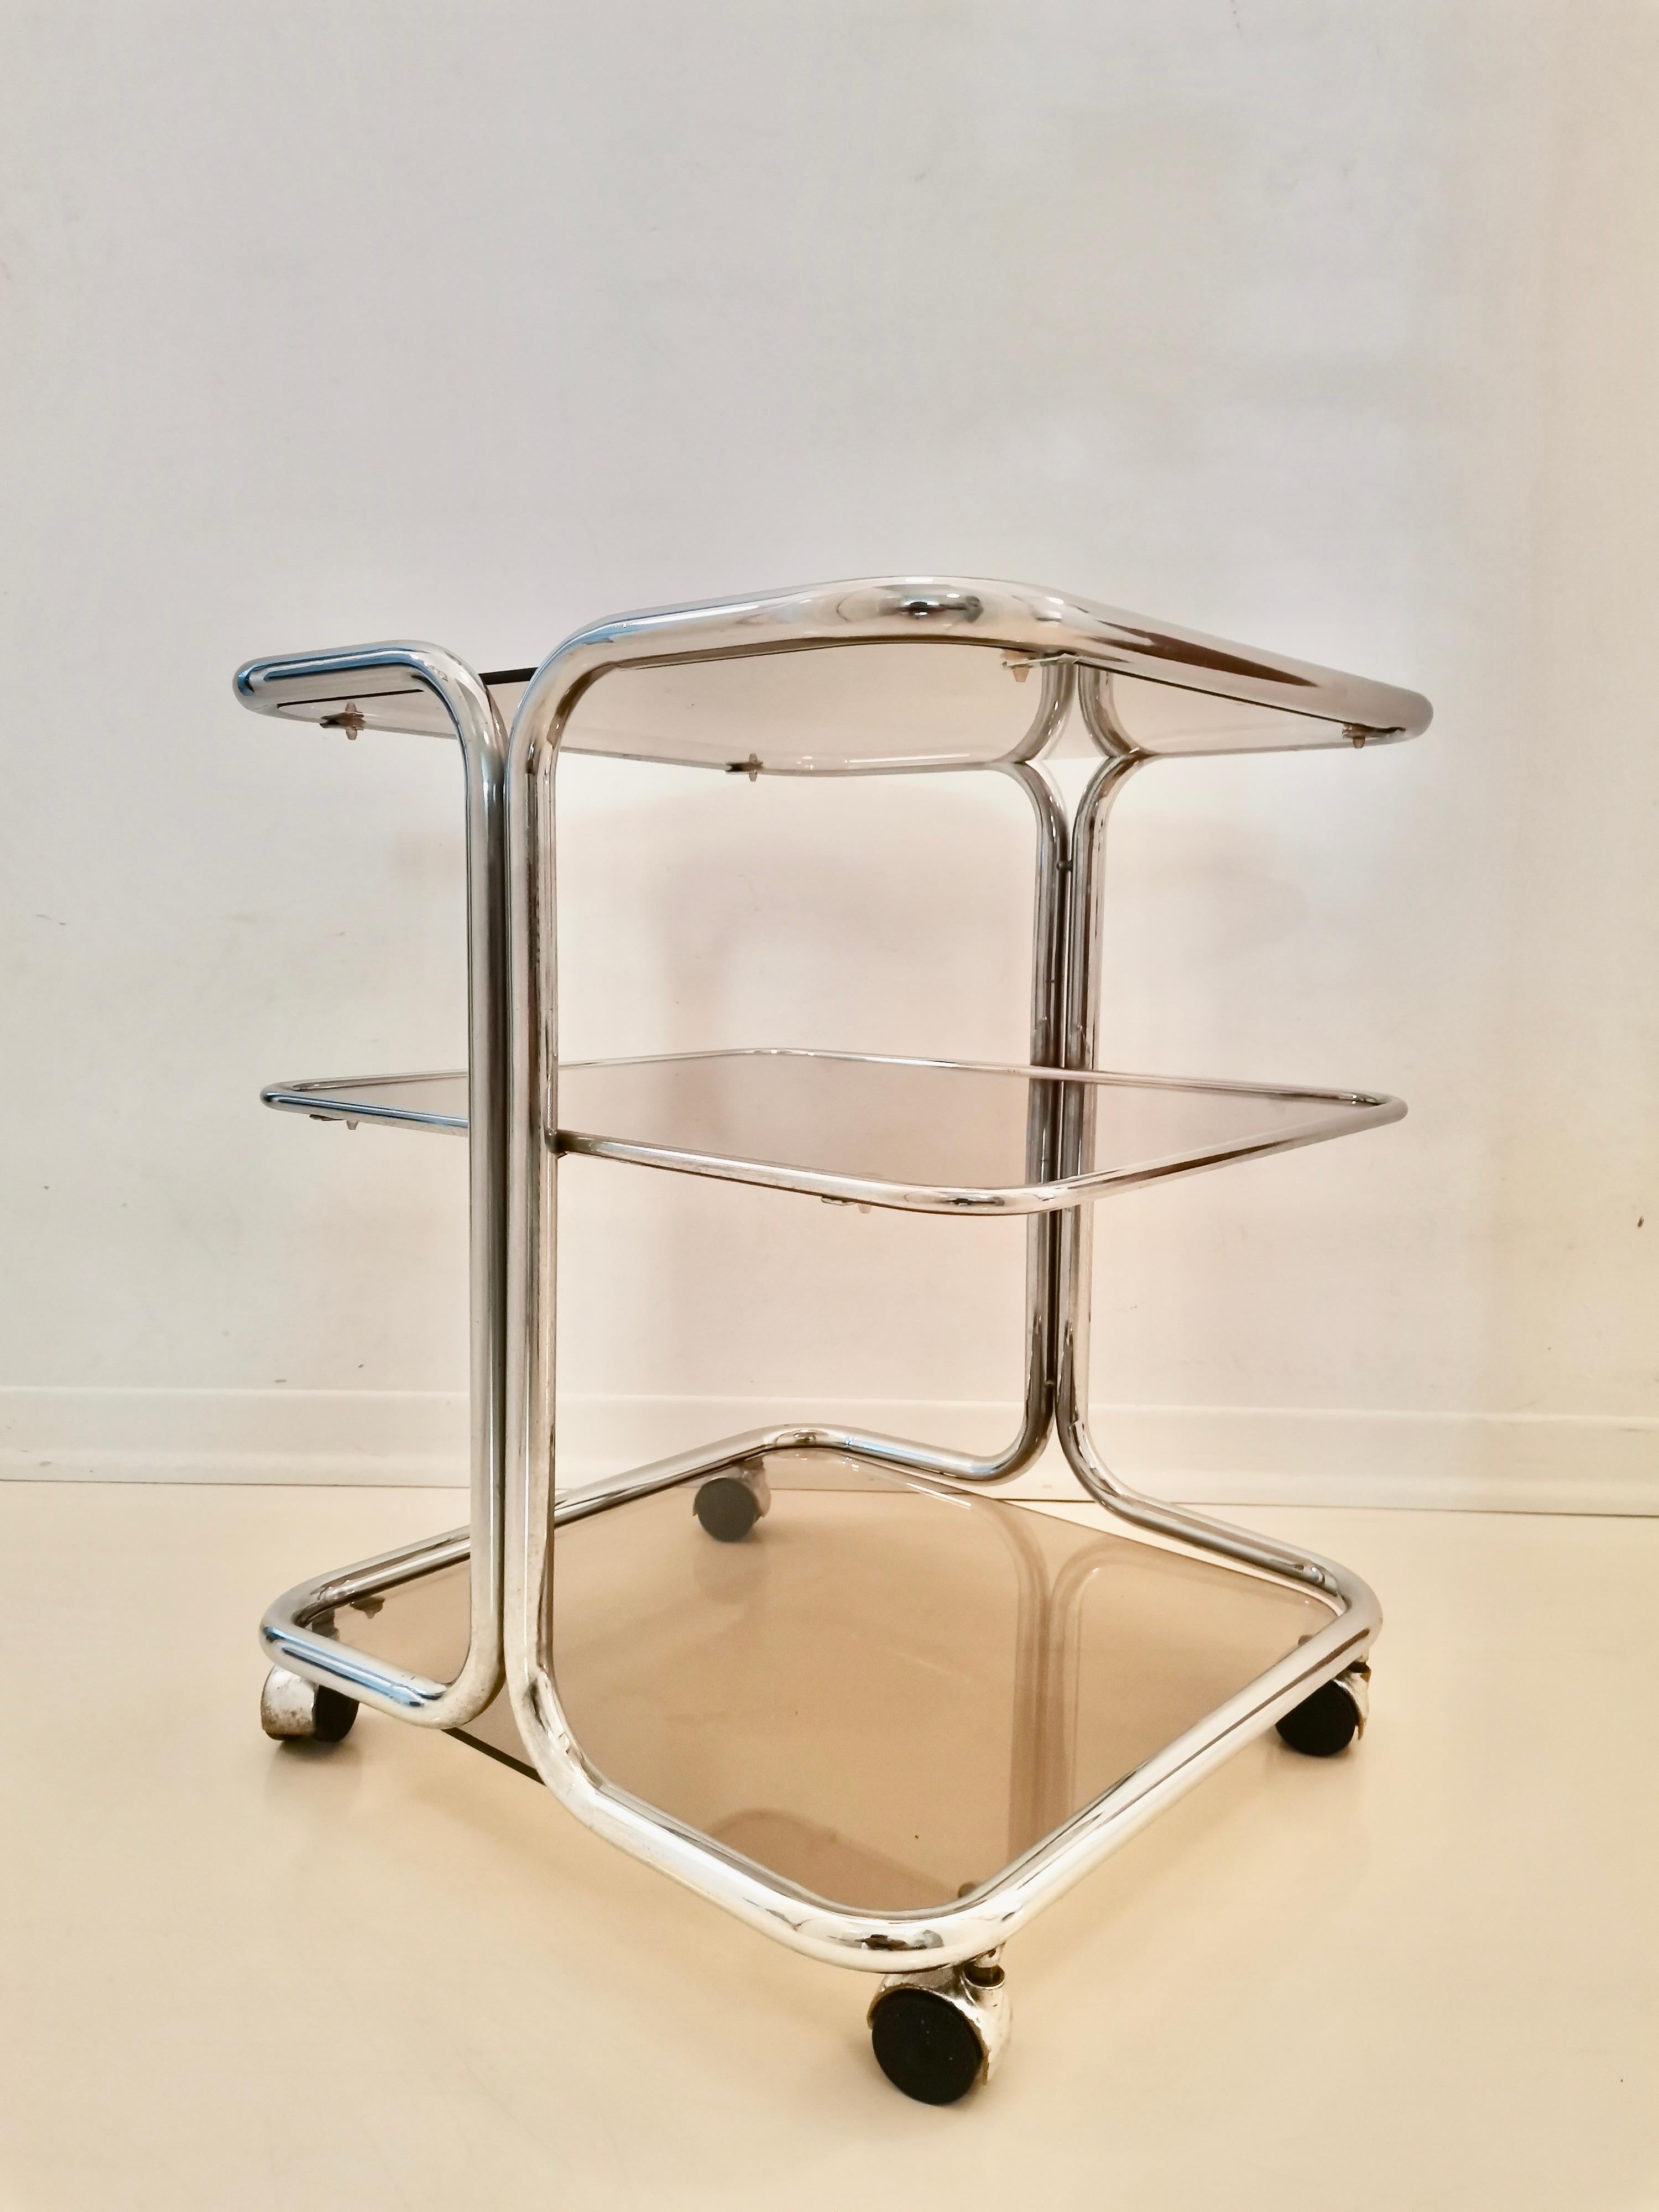 Magnificent Italian chromed vintage bar cart. All original parts. The trolley has three shelves in smoked glass. Its modern yet classic design gives impression of luxury and style. Can be combined with all styles of furniture and interiors.

Period: